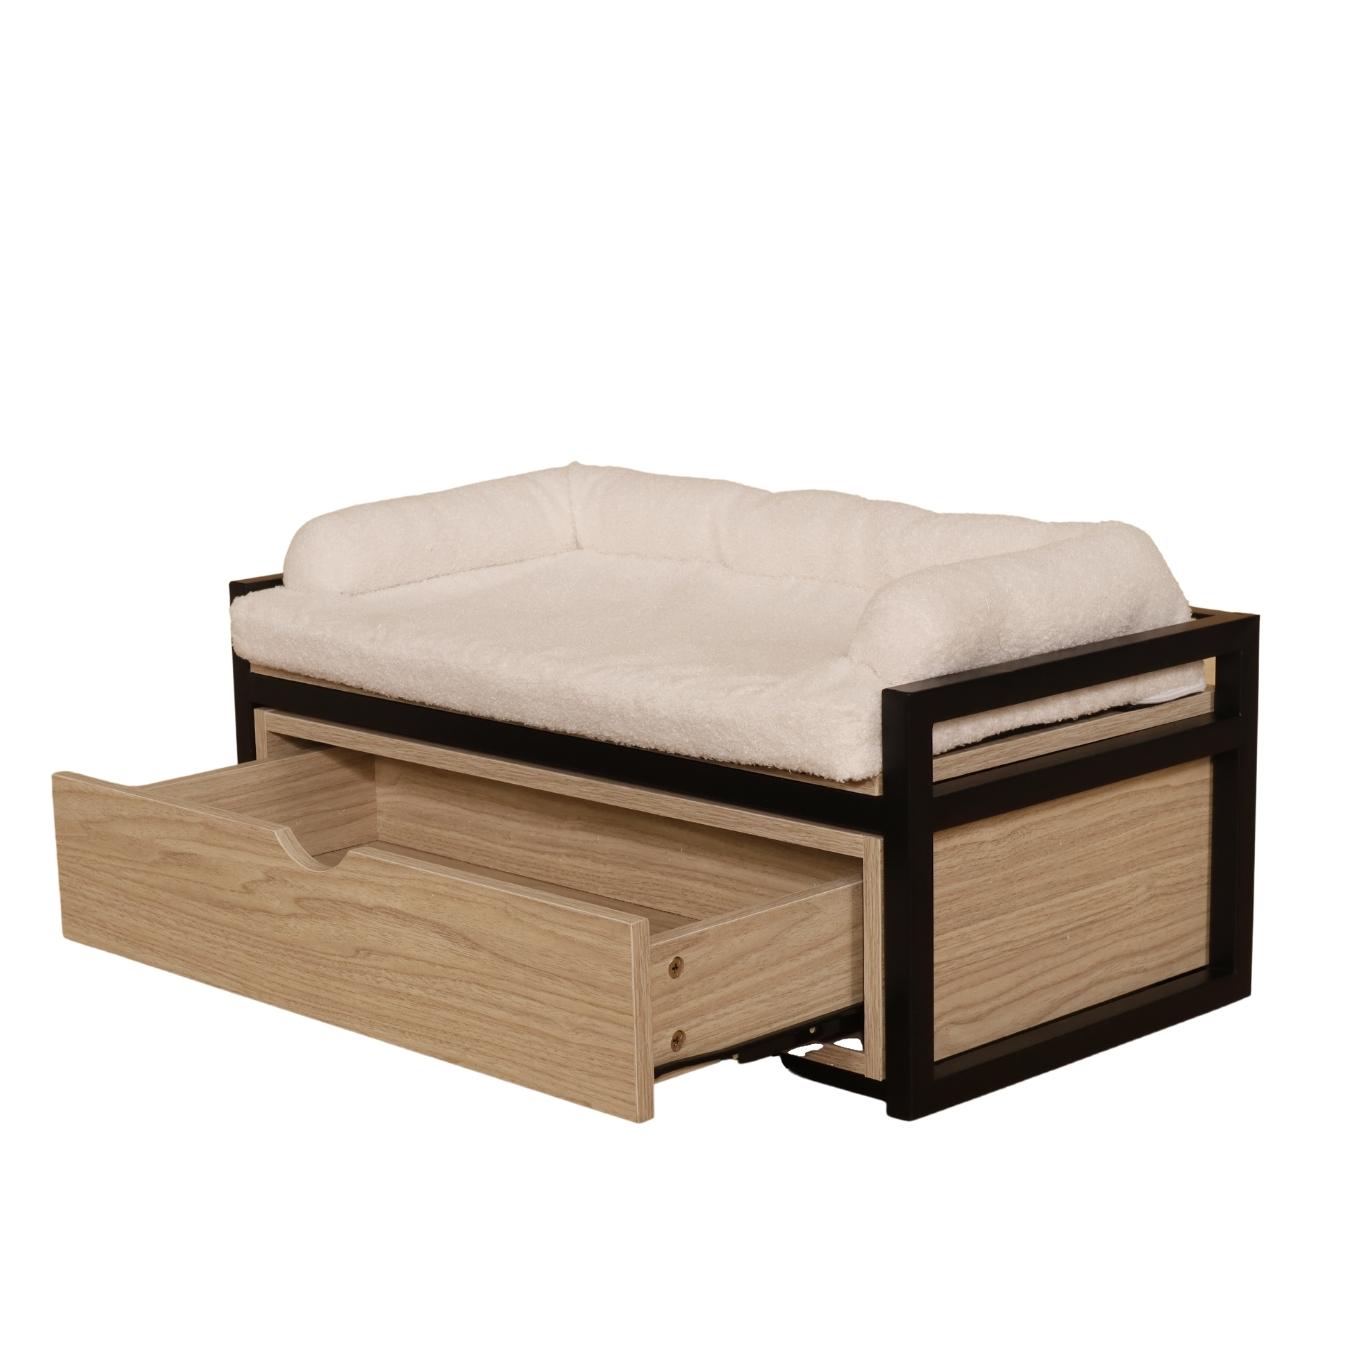 Mr. Chuck - MARC Elevated Pet Bed with Storage AF Home